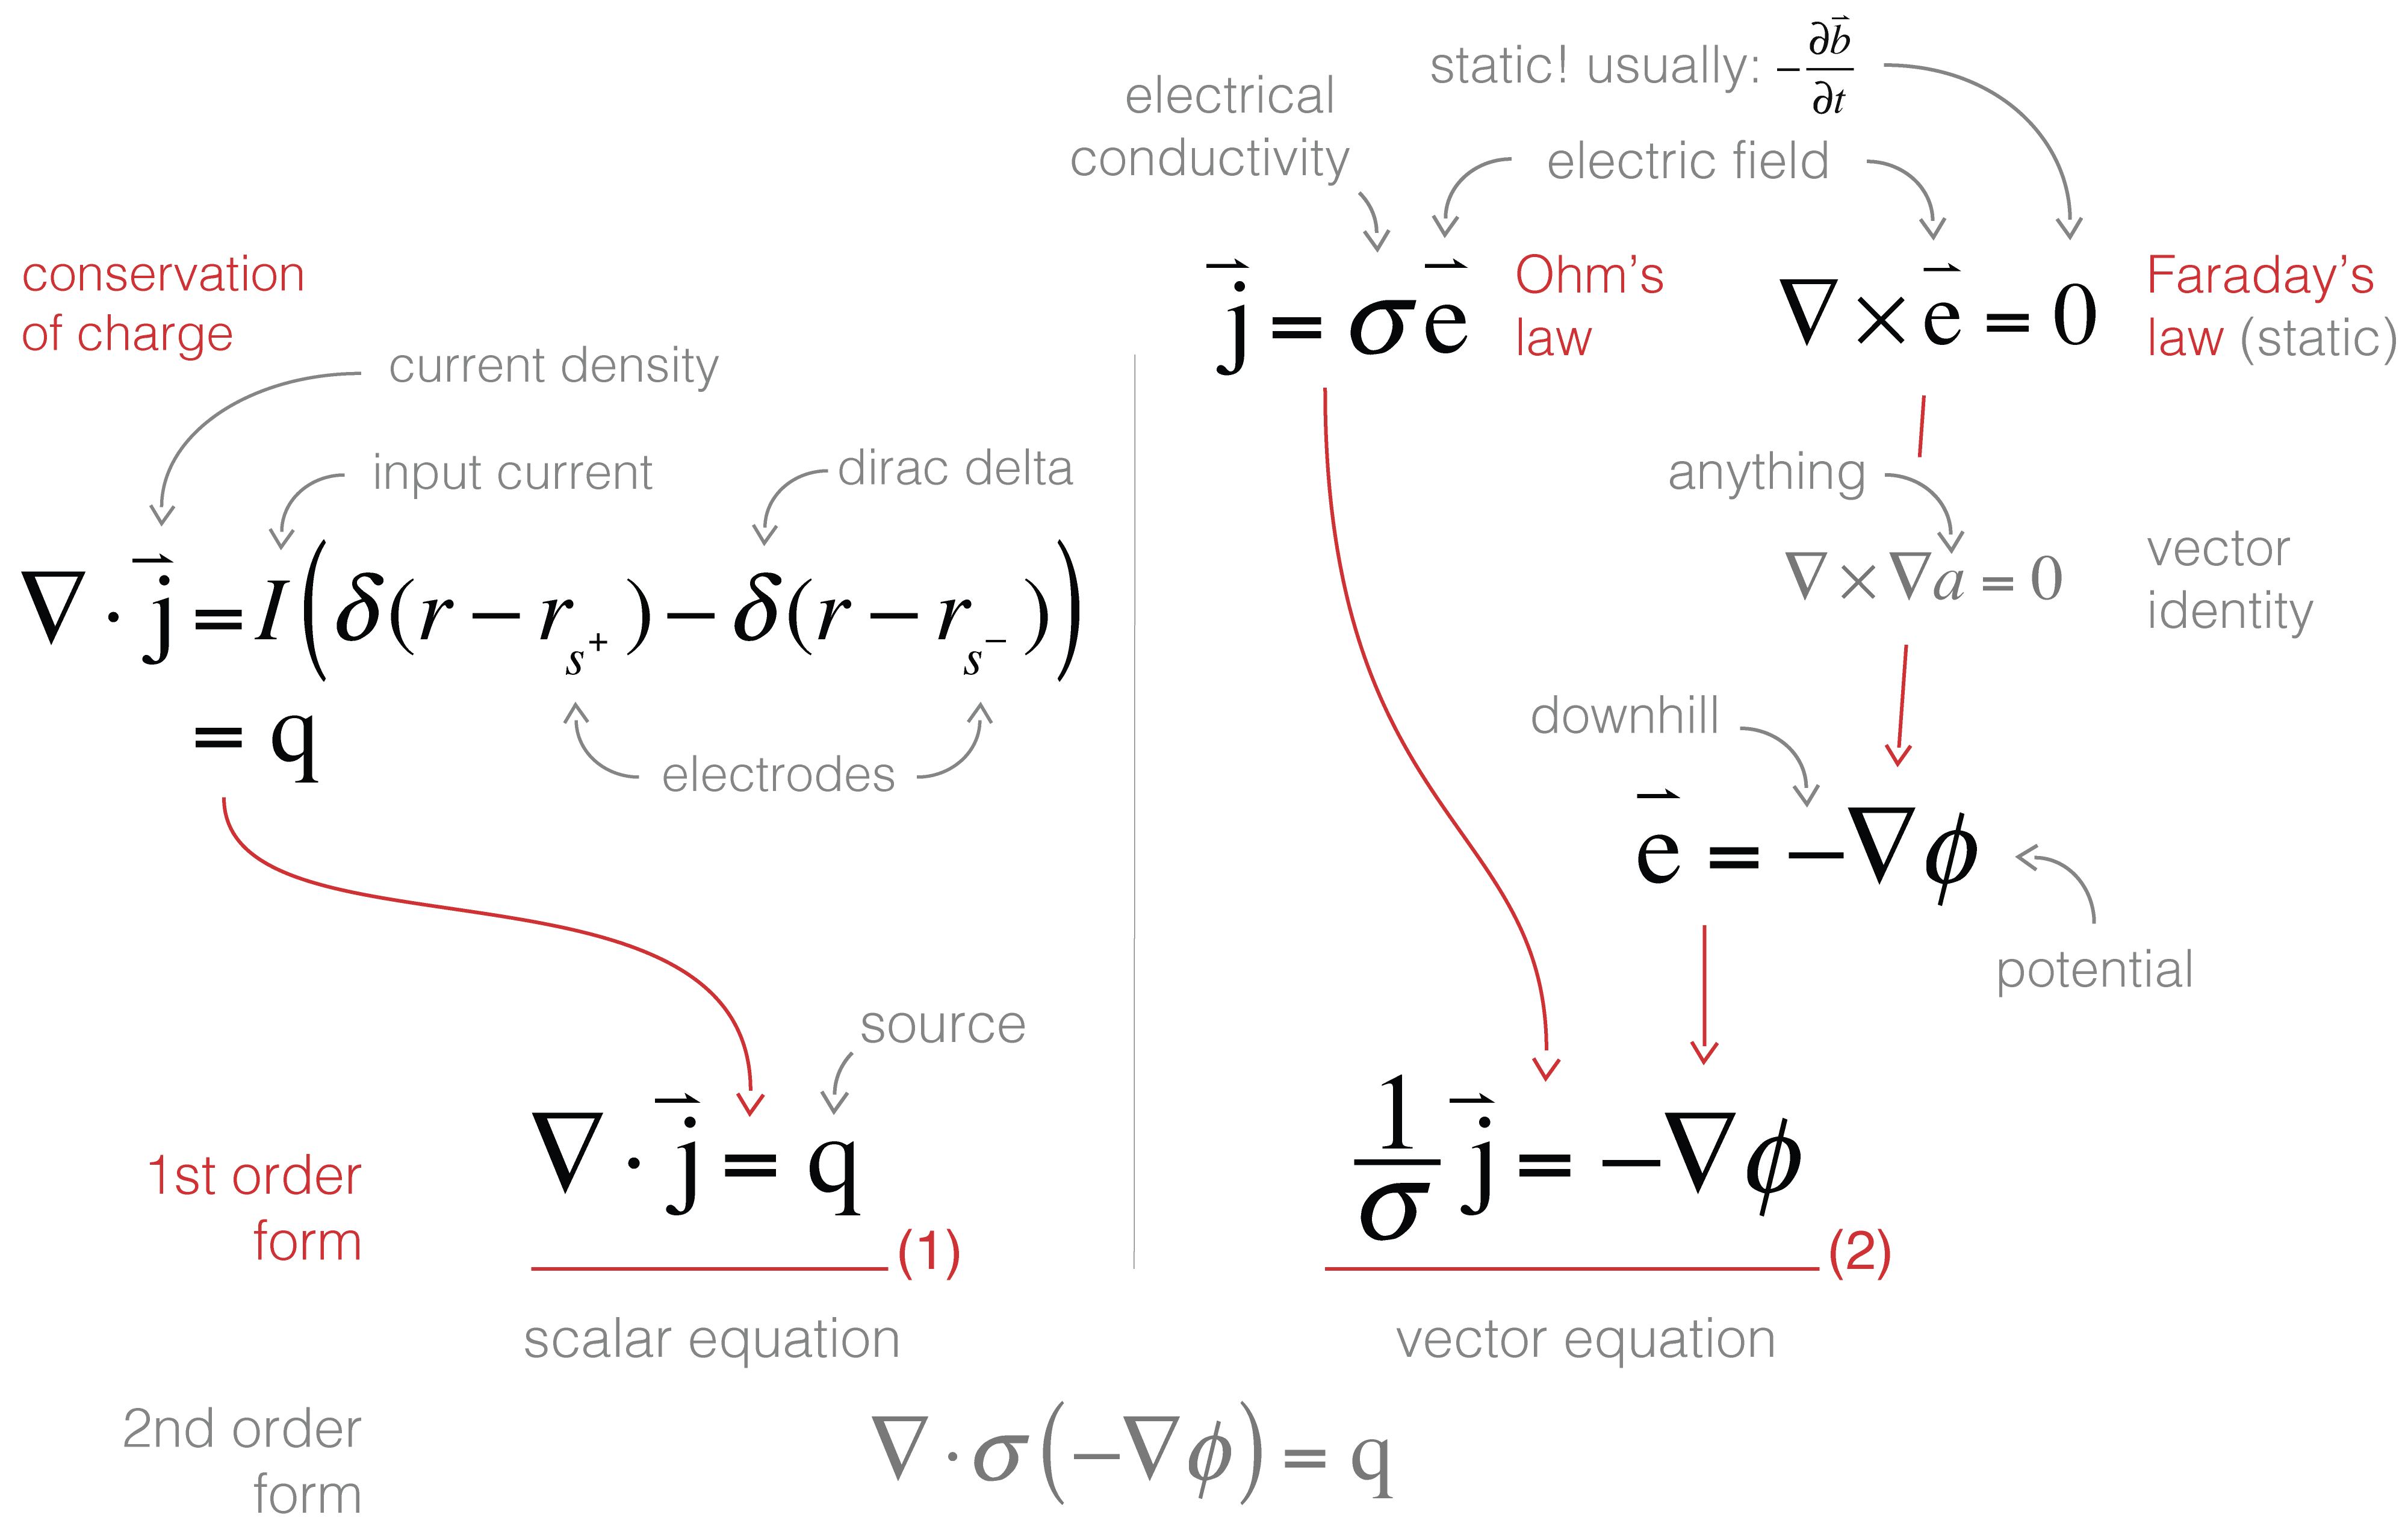 Derivation of the DC resistivity equations.